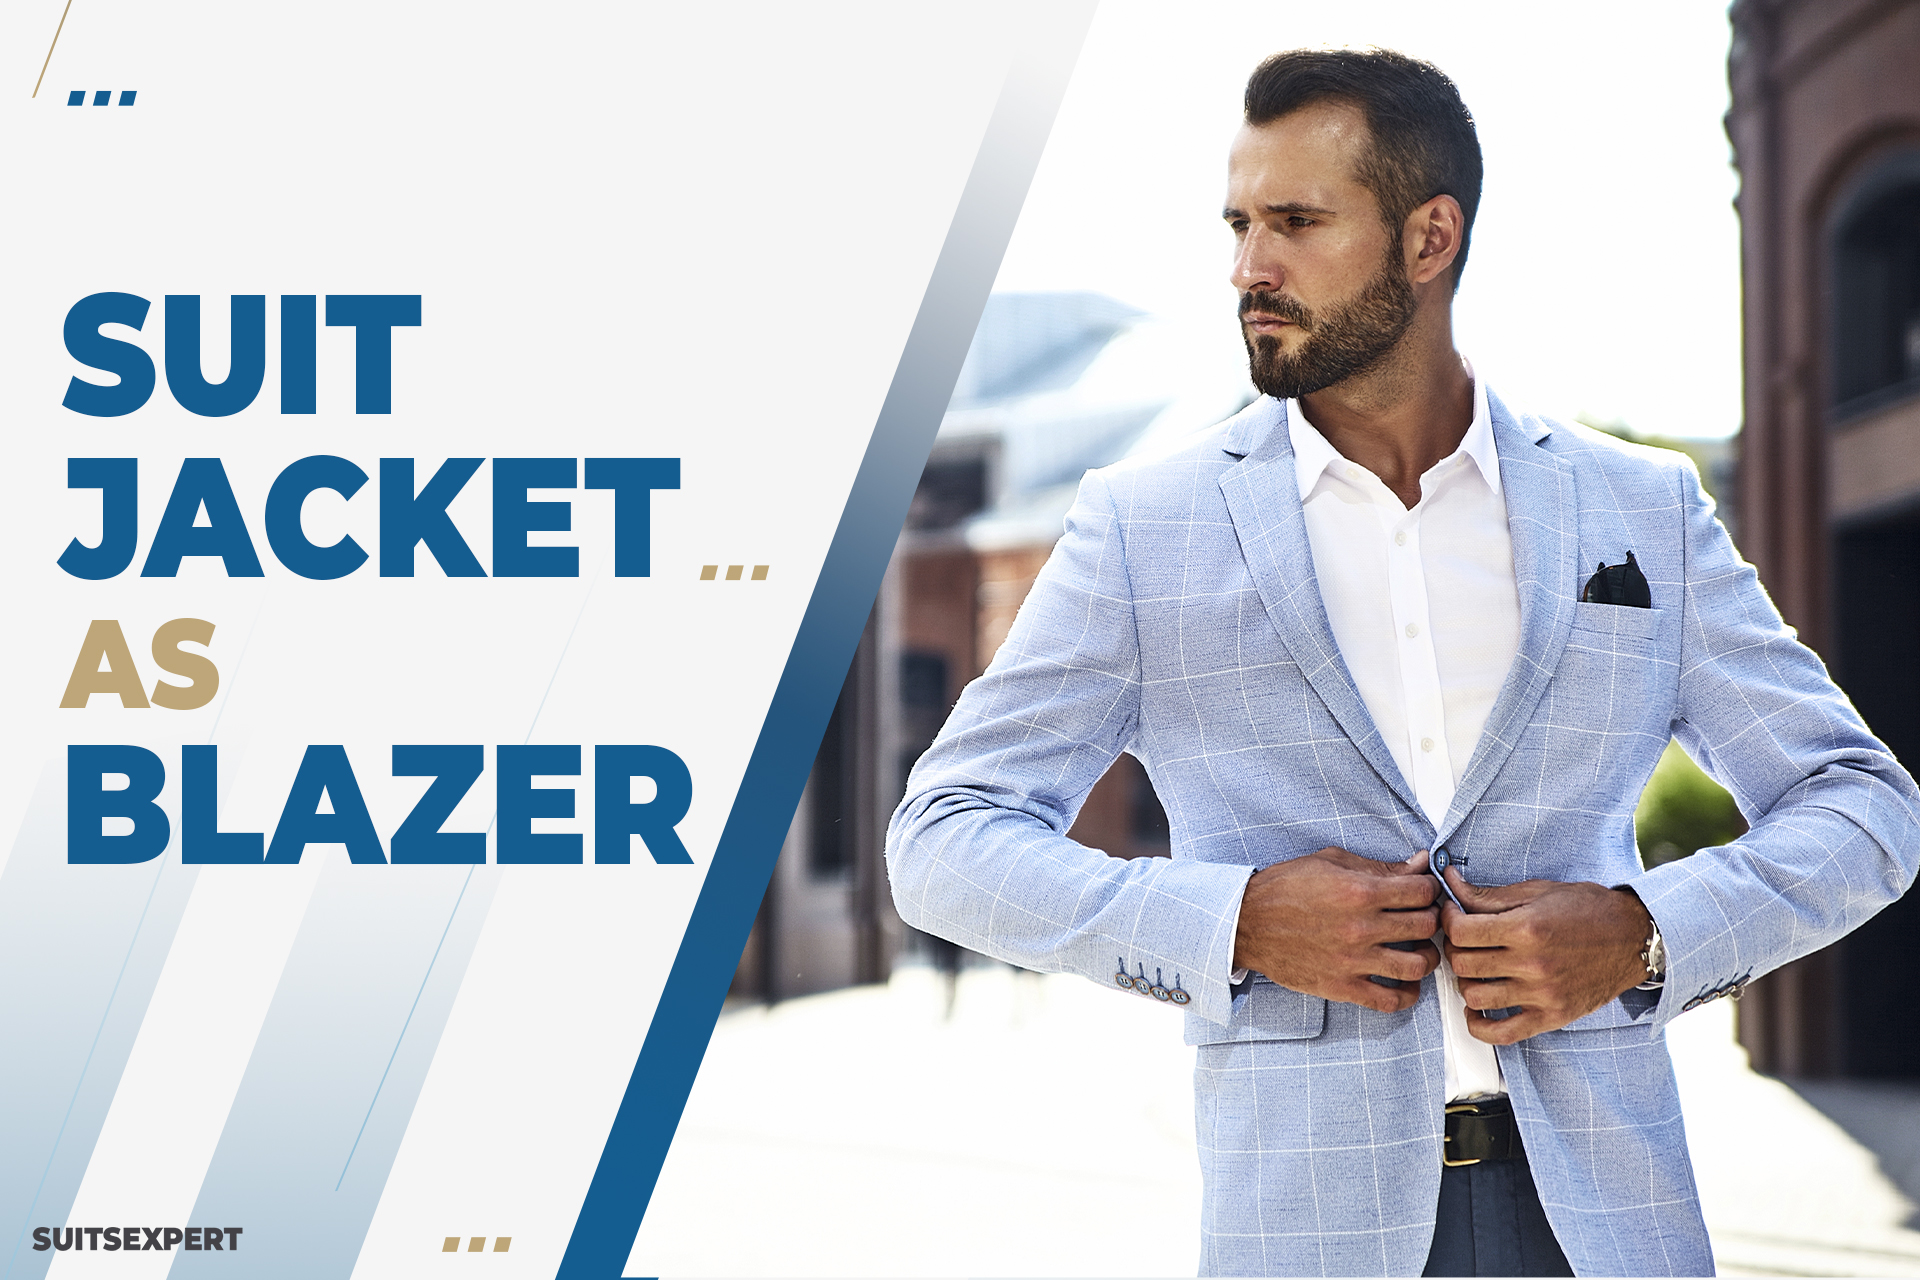 Can You Wear a Suit Jacket as a Blazer? - Suits Expert